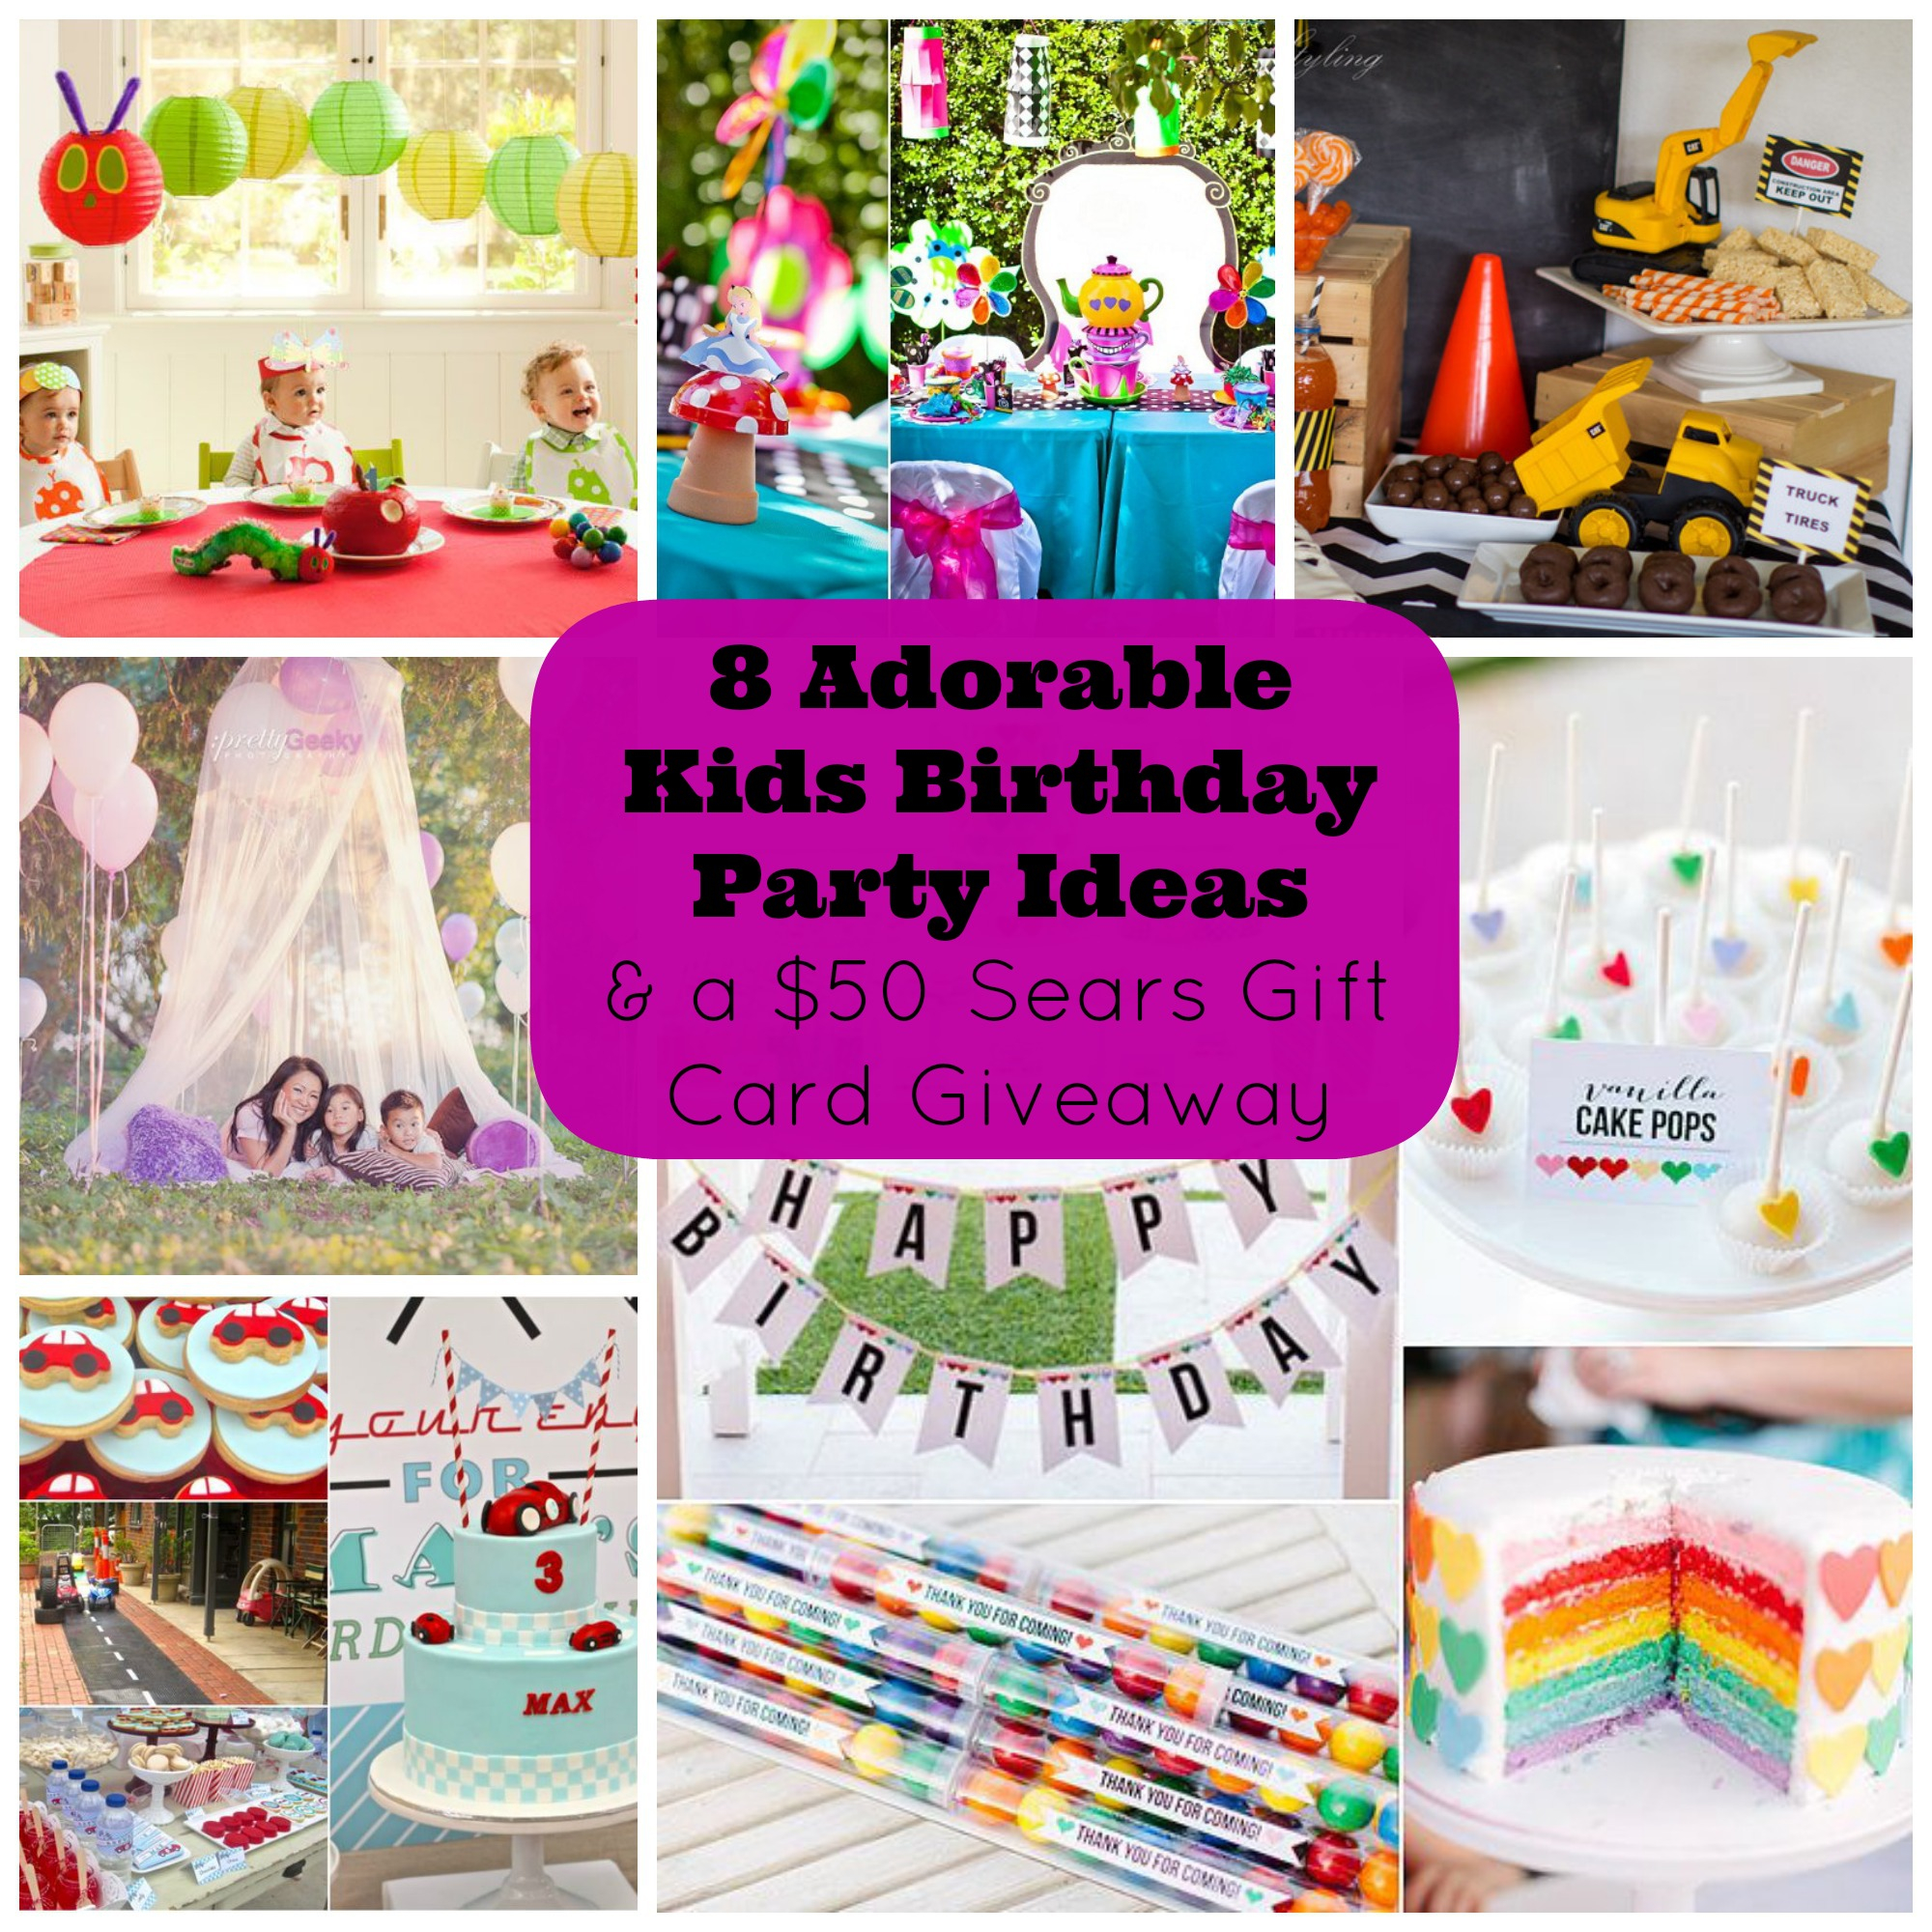 Birthday Gift Card Ideas 8 Adorable Kids Birthday Party Ideas And A Giveaway For A 50 Sears